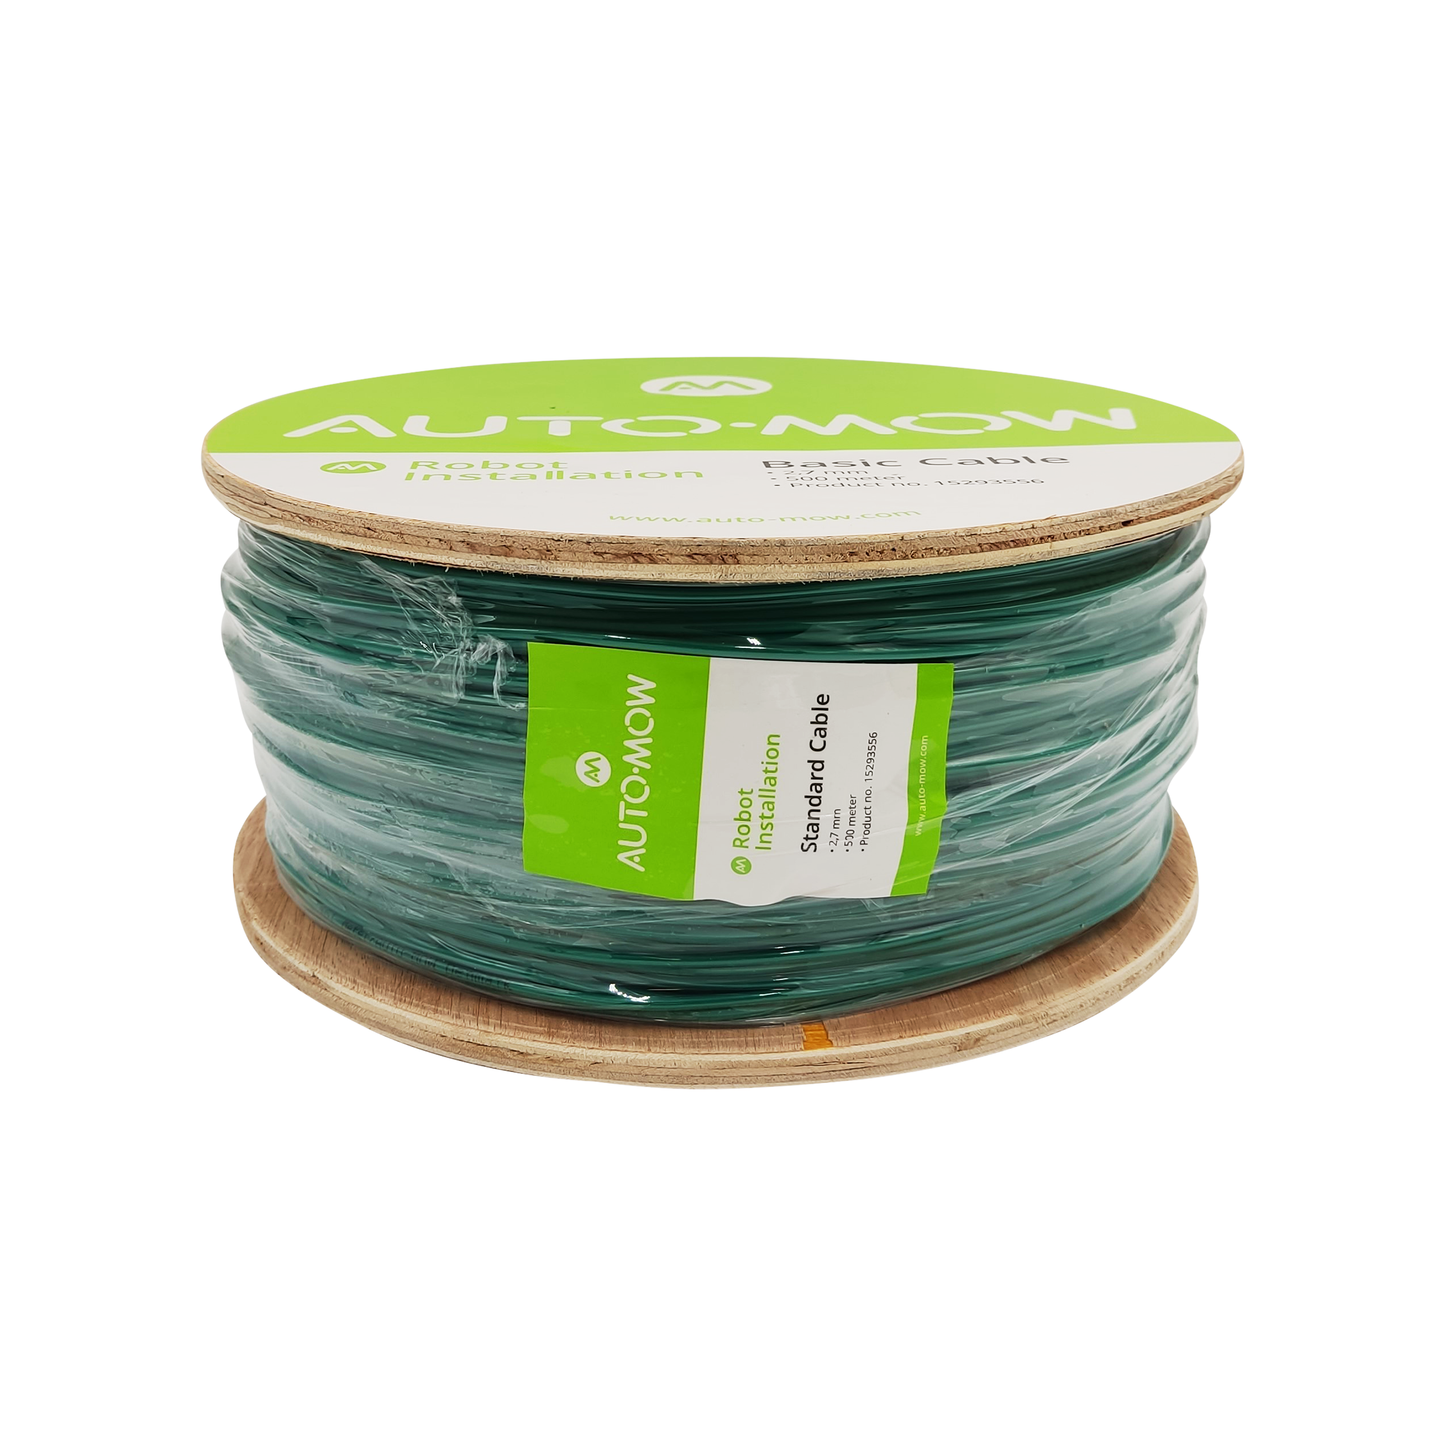 Auto-Mow Boundary Wire 9 Gauge AWG Basic Cable (2.7mm) Thick, Green